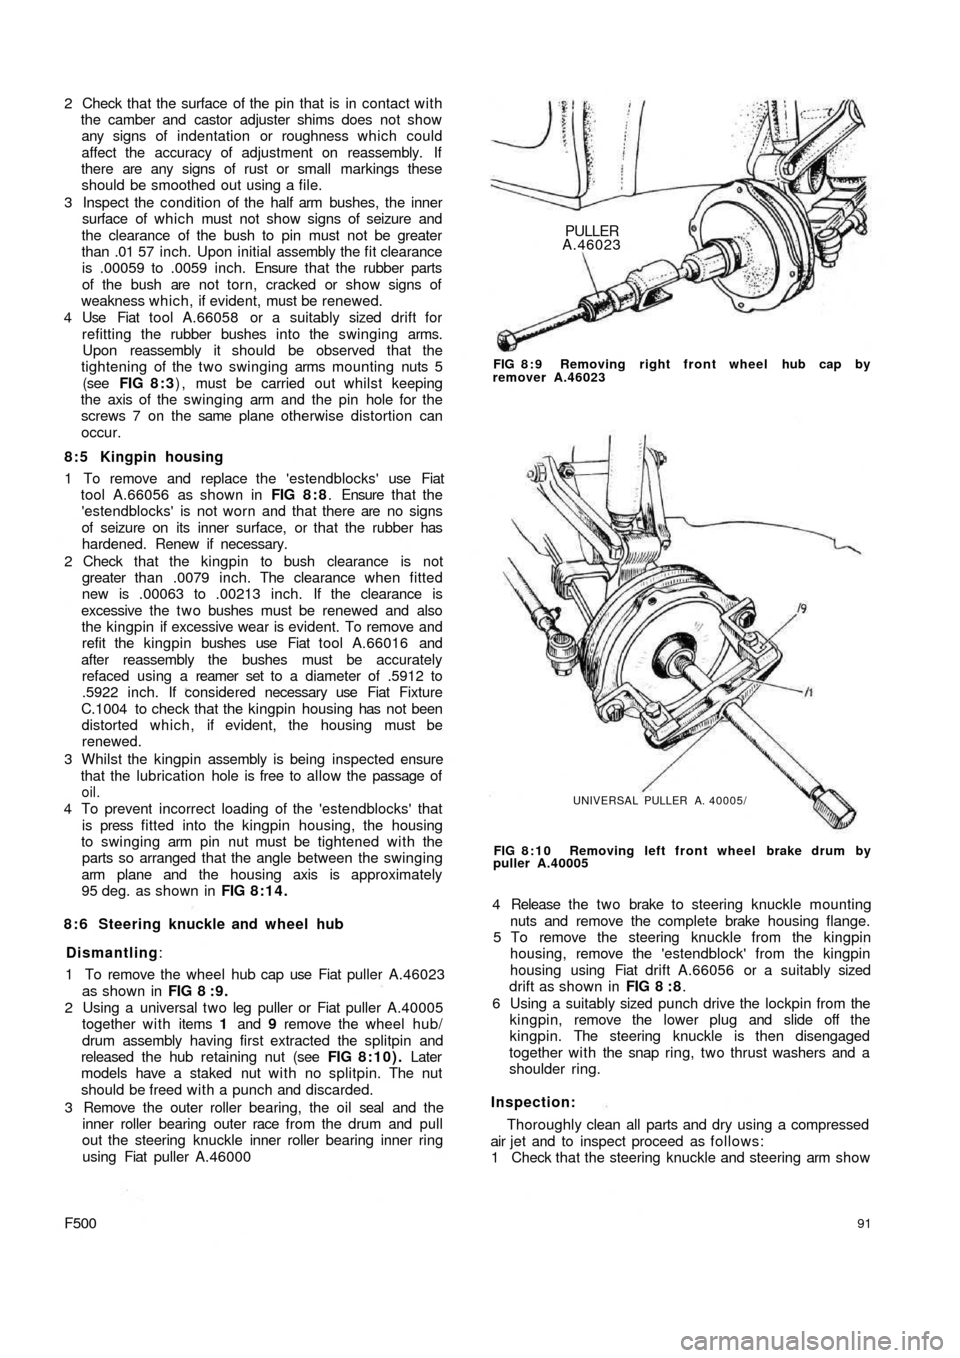 FIAT 500 1959 1.G Workshop Manual 2  Check that the surface of the pin that is in contact with
the camber and castor adjuster shims does not show
any signs of indentation or roughness which could
affect the  accuracy of adjustment on 